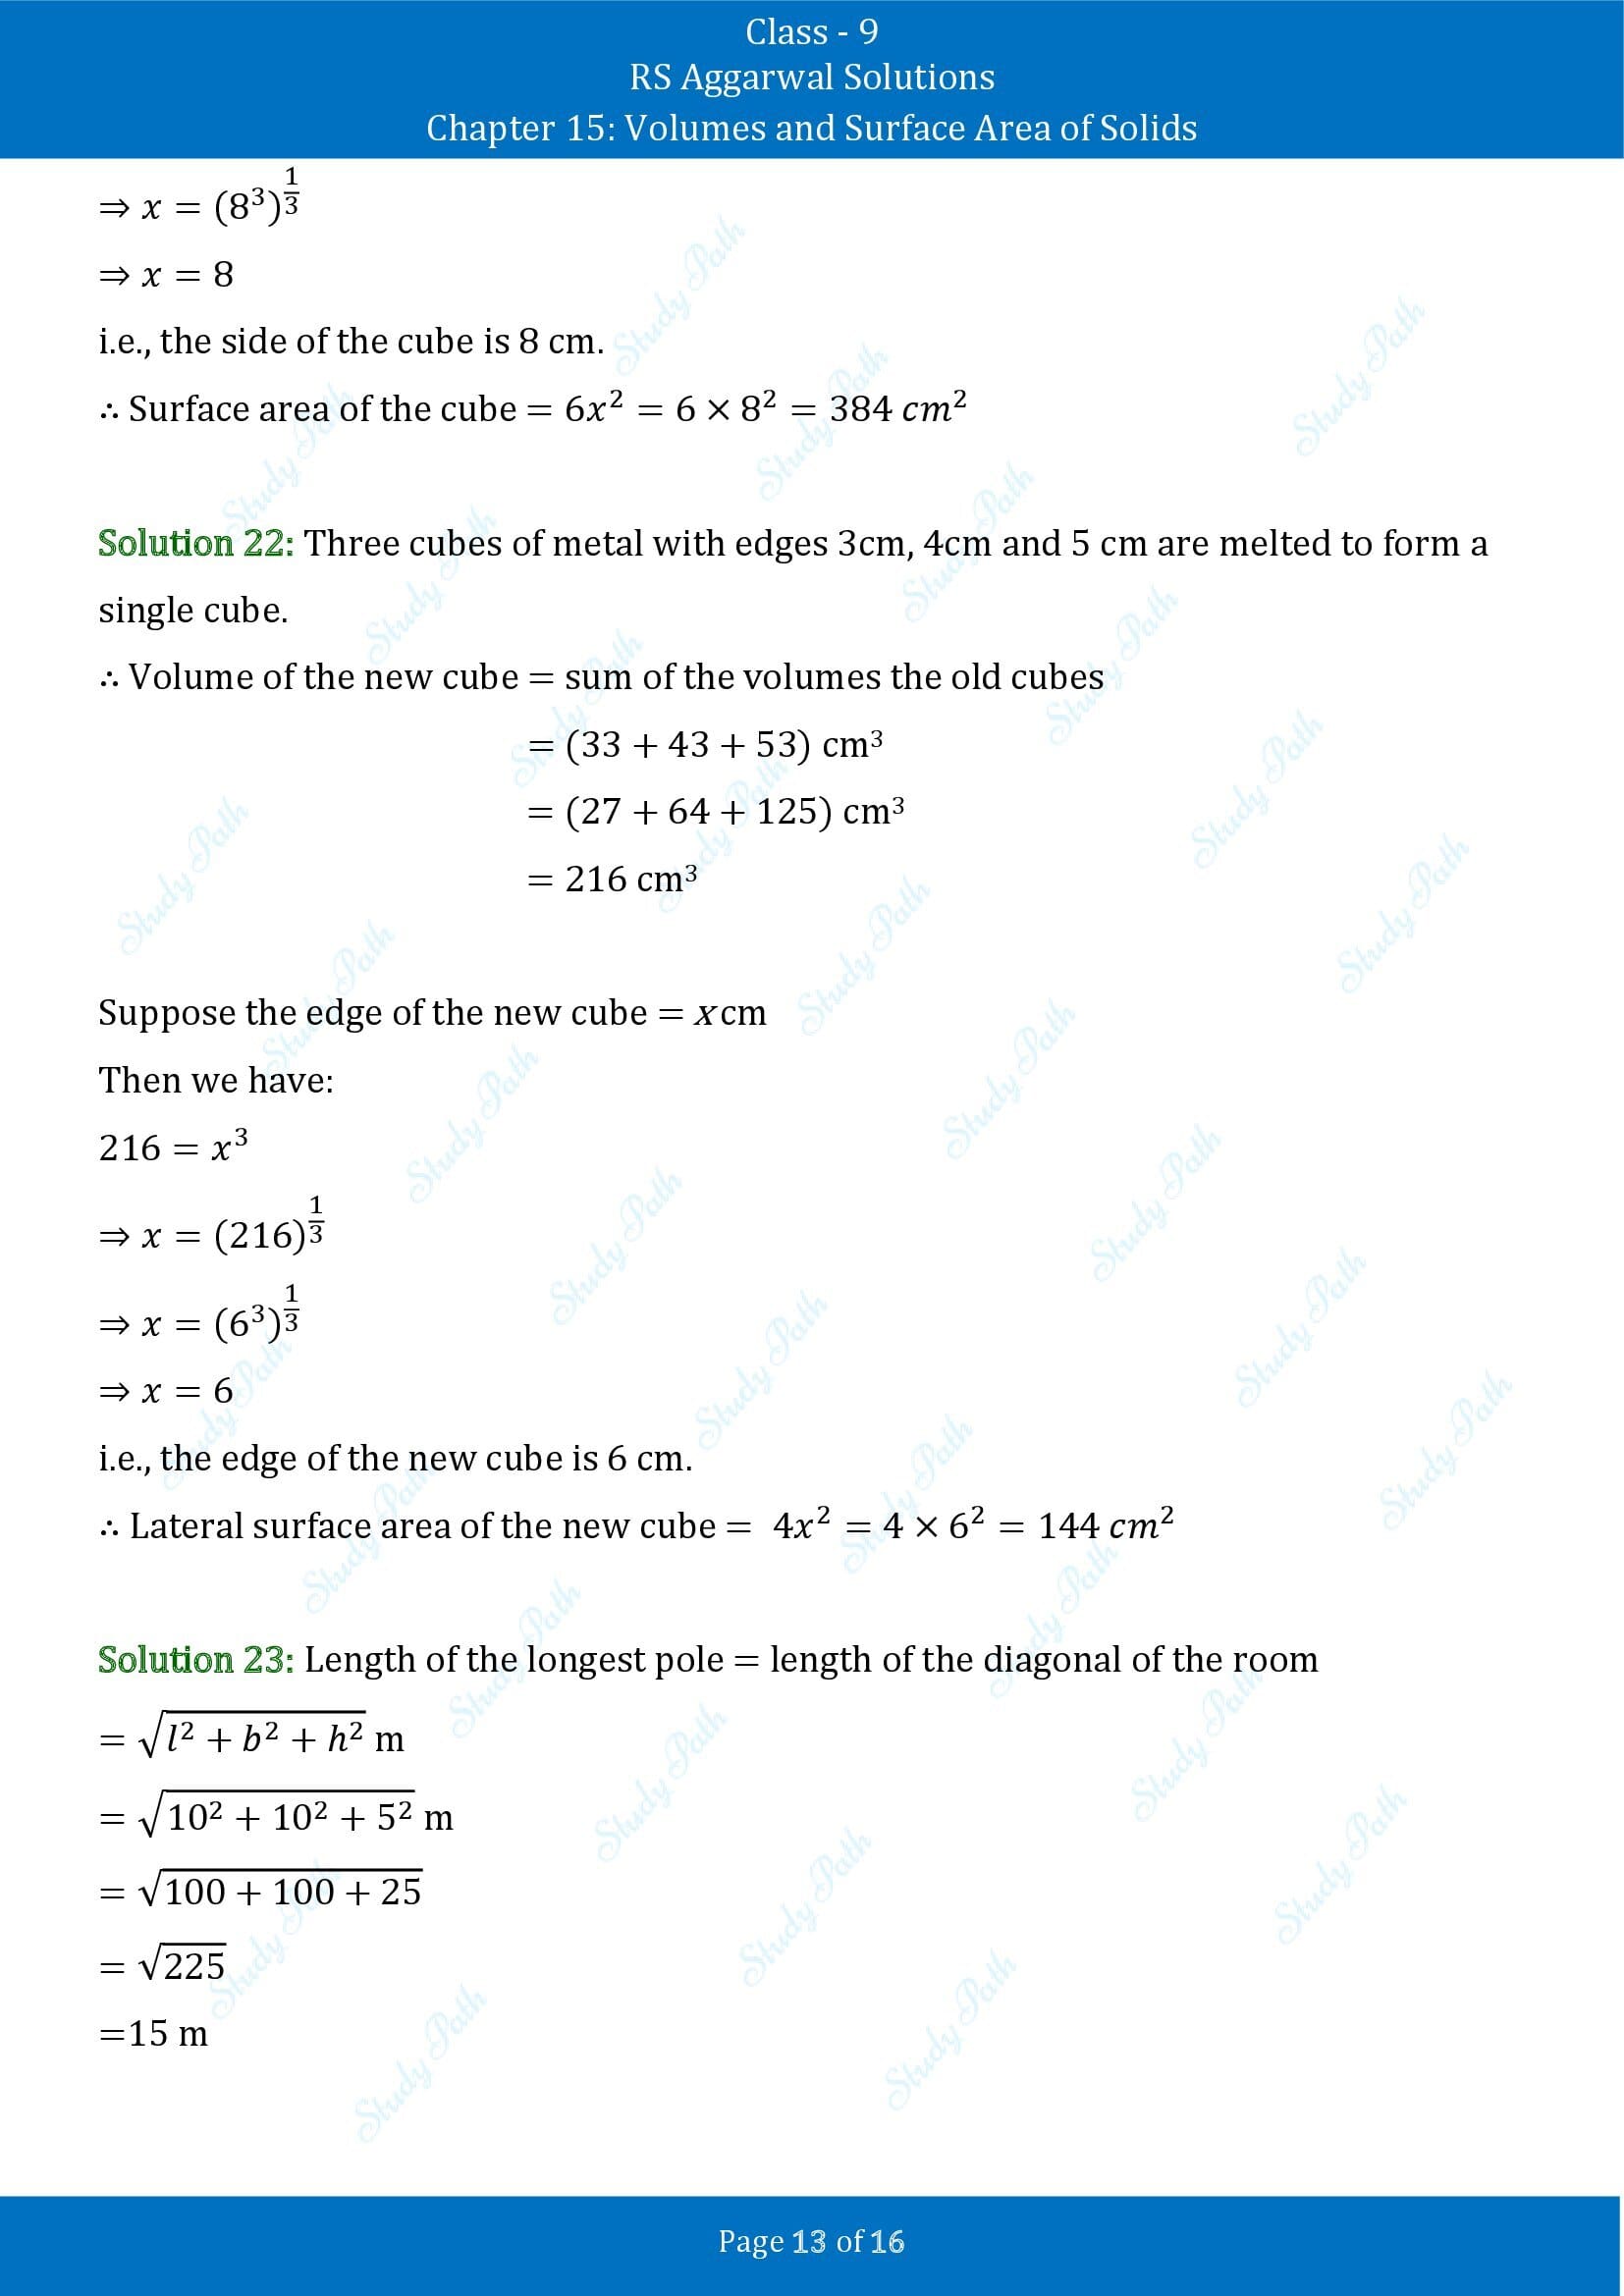 RS Aggarwal Solutions Class 9 Chapter 15 Volumes and Surface Area of Solids Exercise 15A 00013